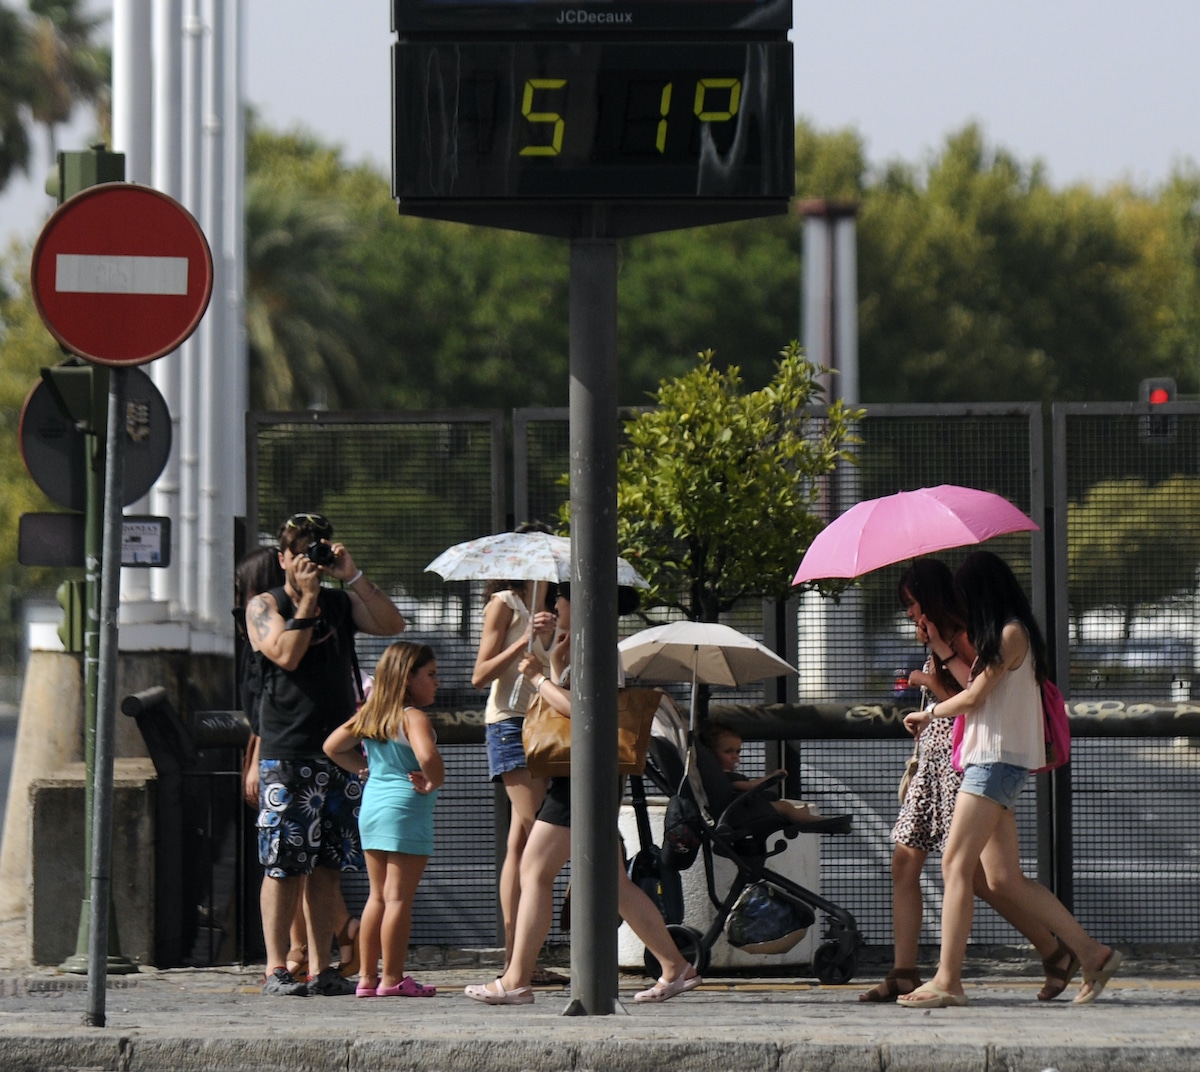 During a heat wave, a street thermometer in Seville, Spain shows 51 degrees Celsius